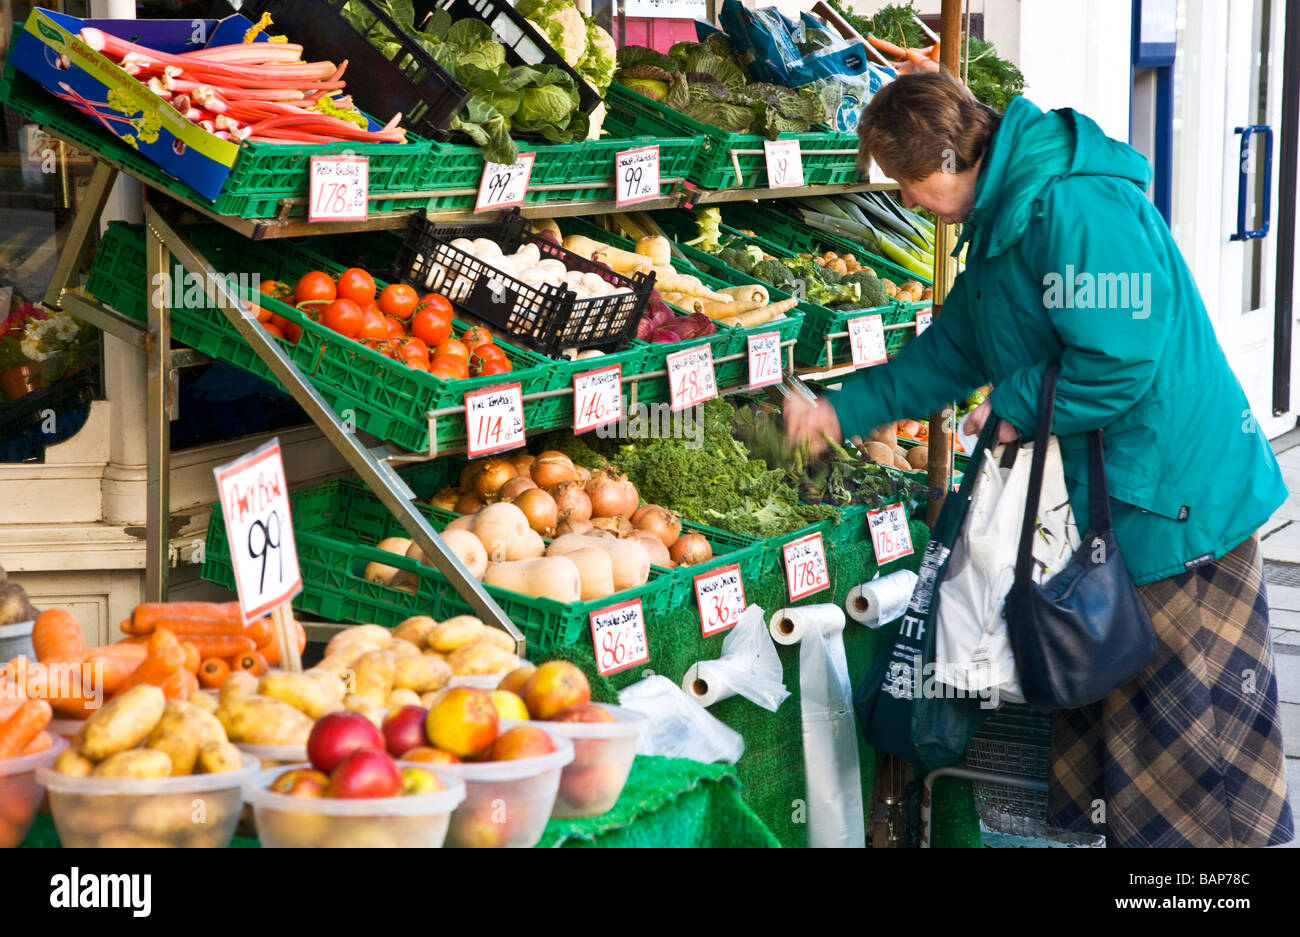 A middle aged woman choosing vegetable produce from the shop front street level display of greengrocer shop or store in England Stock Photo